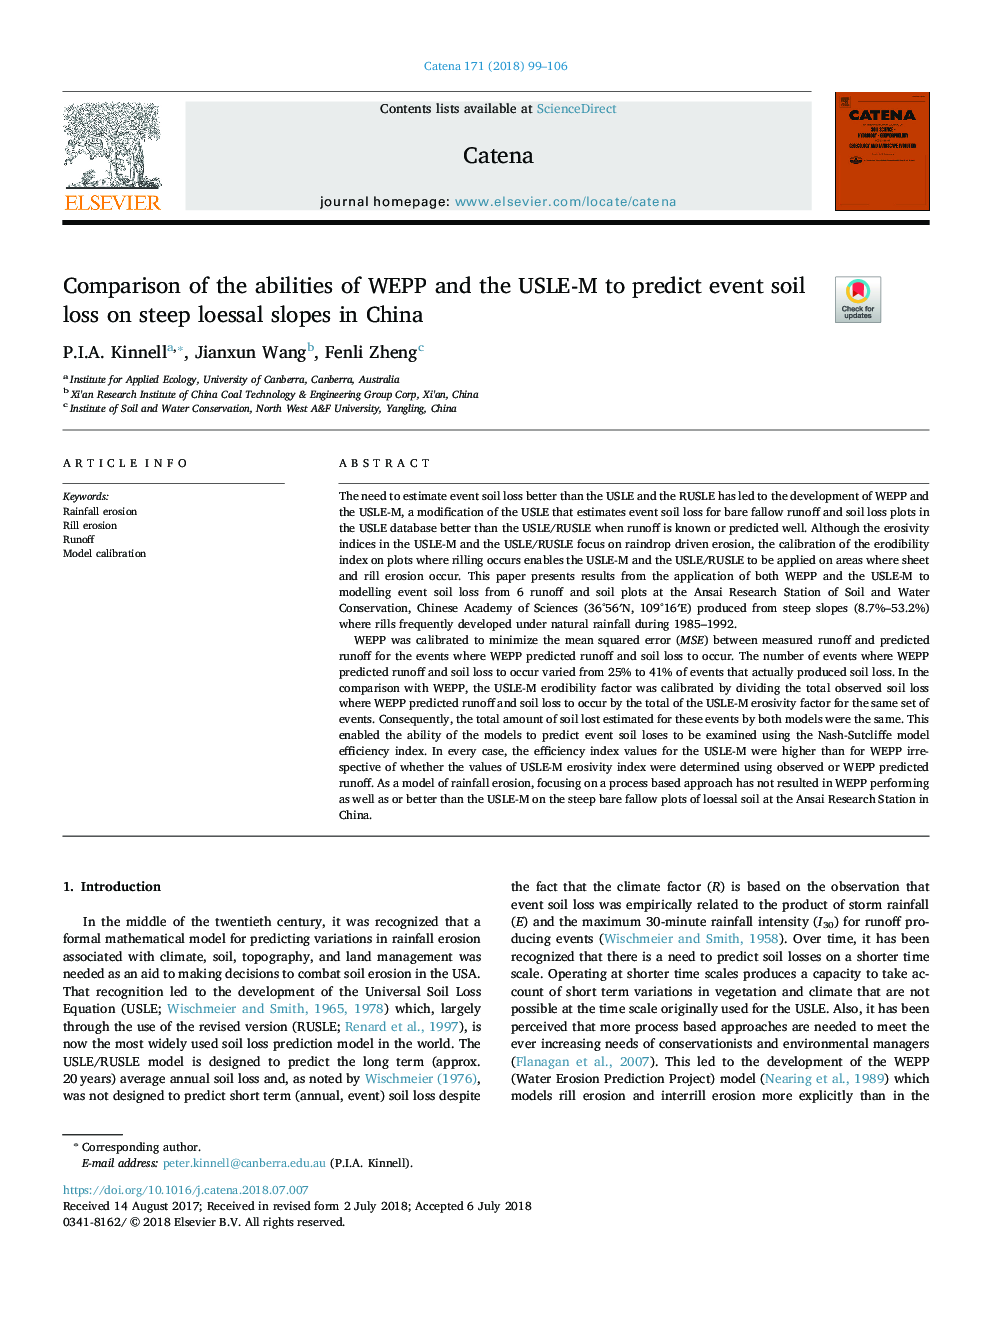 Comparison of the abilities of WEPP and the USLE-M to predict event soil loss on steep loessal slopes in China